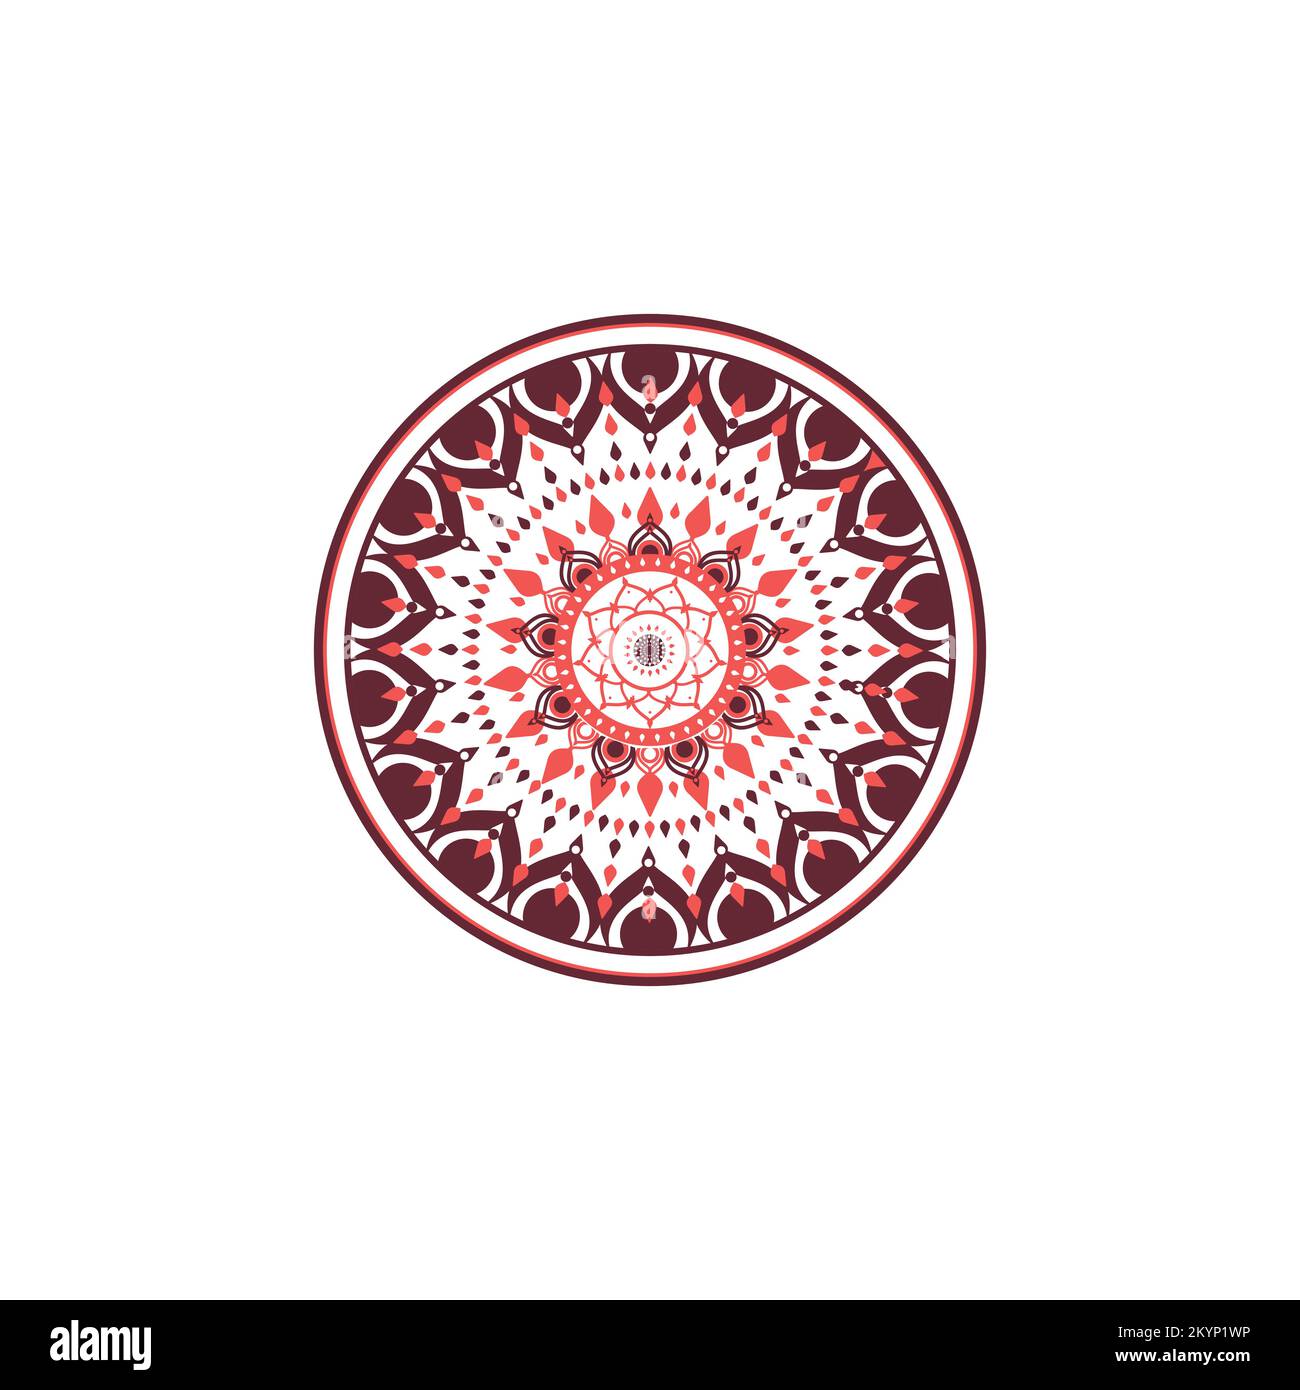 Handmade rose with a circle mandala design on a white background Stock Vector